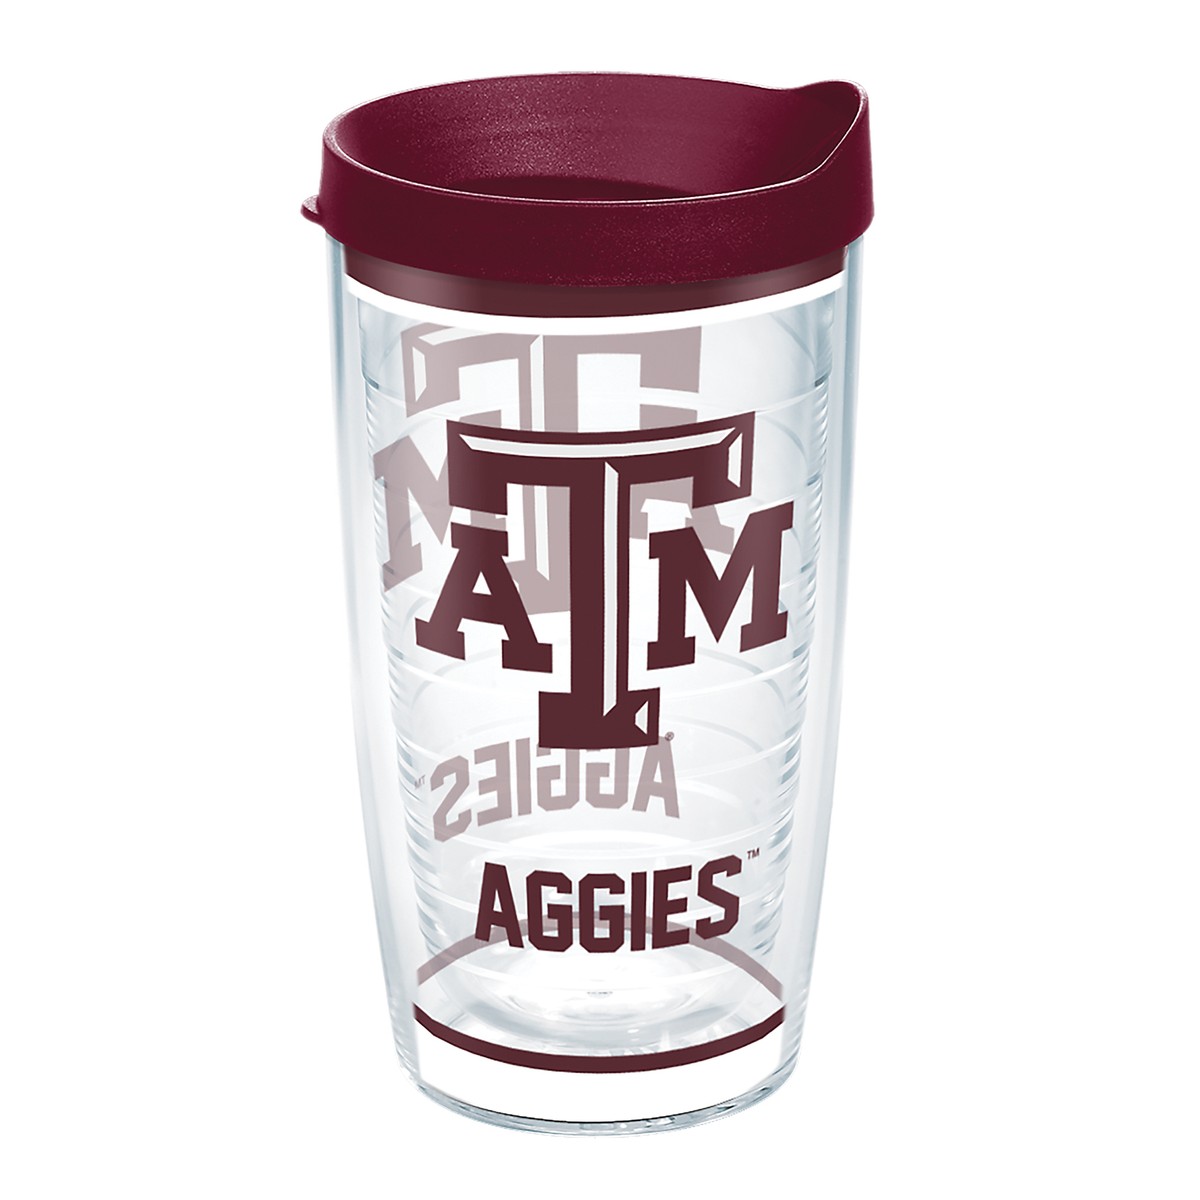 Texas A&M 16 oz. Tervis Tumblers - Set of 4 at M.LaHart & Co.